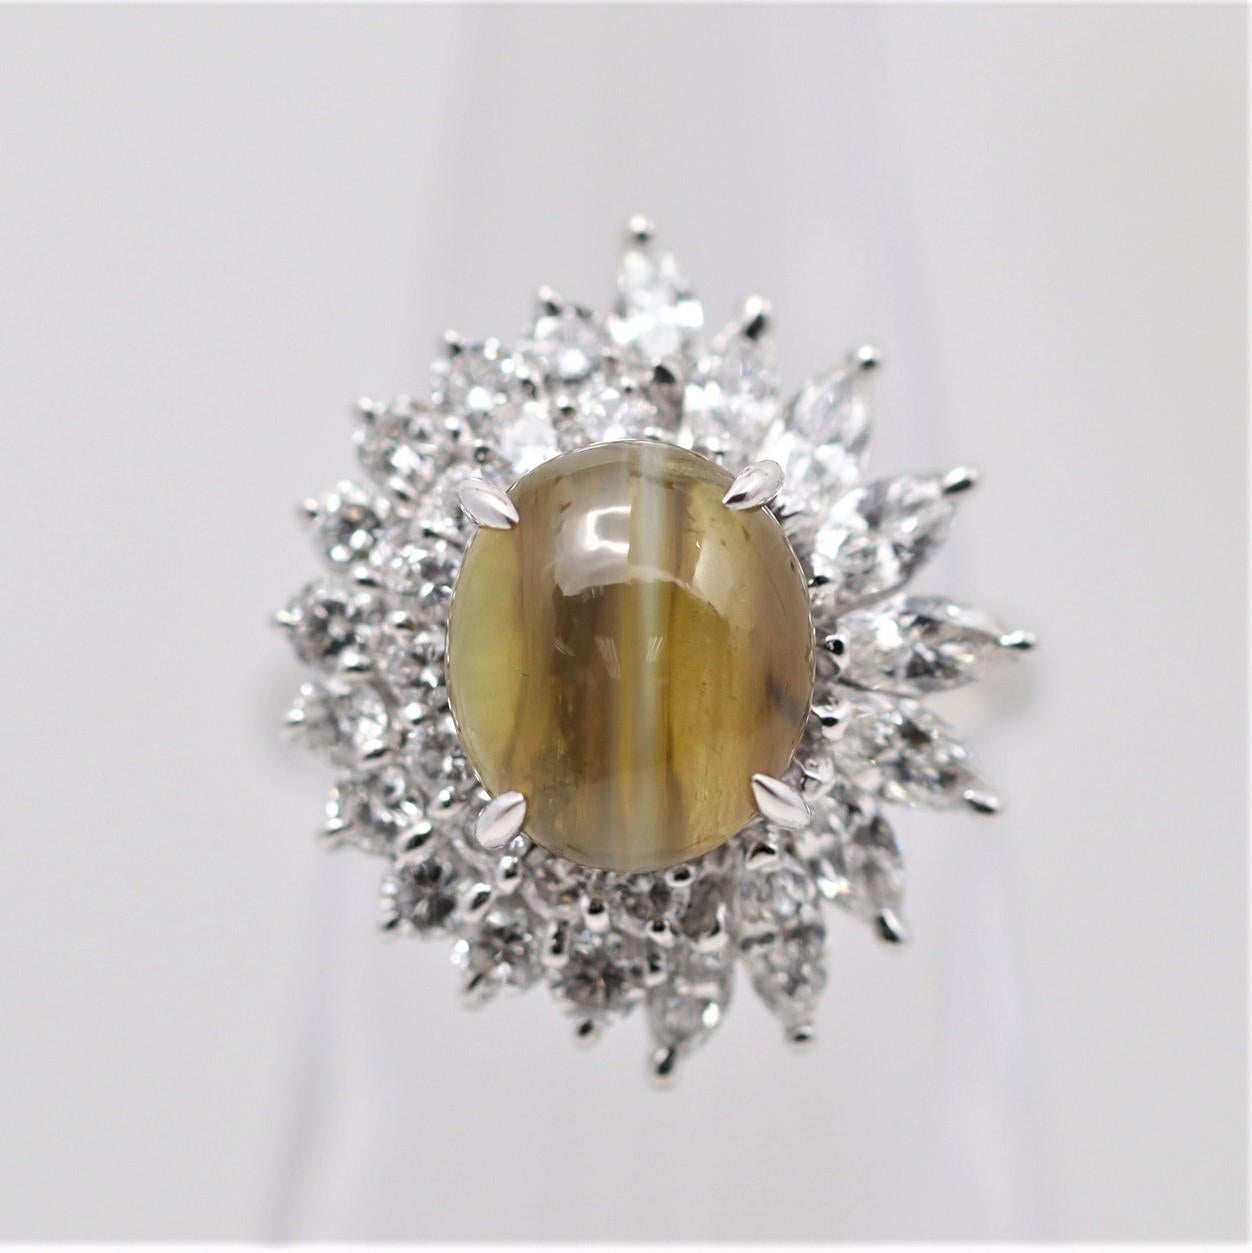 A beautiful ring featuring a fine gem-quality cats eye chrysoberyl weighing 5.34 carats. It has excellent chatoyancy (cats eye effect) as a strong “cats eye” can be seen across the stone as a light hits it’s top. It is accented by 1.72 carats of